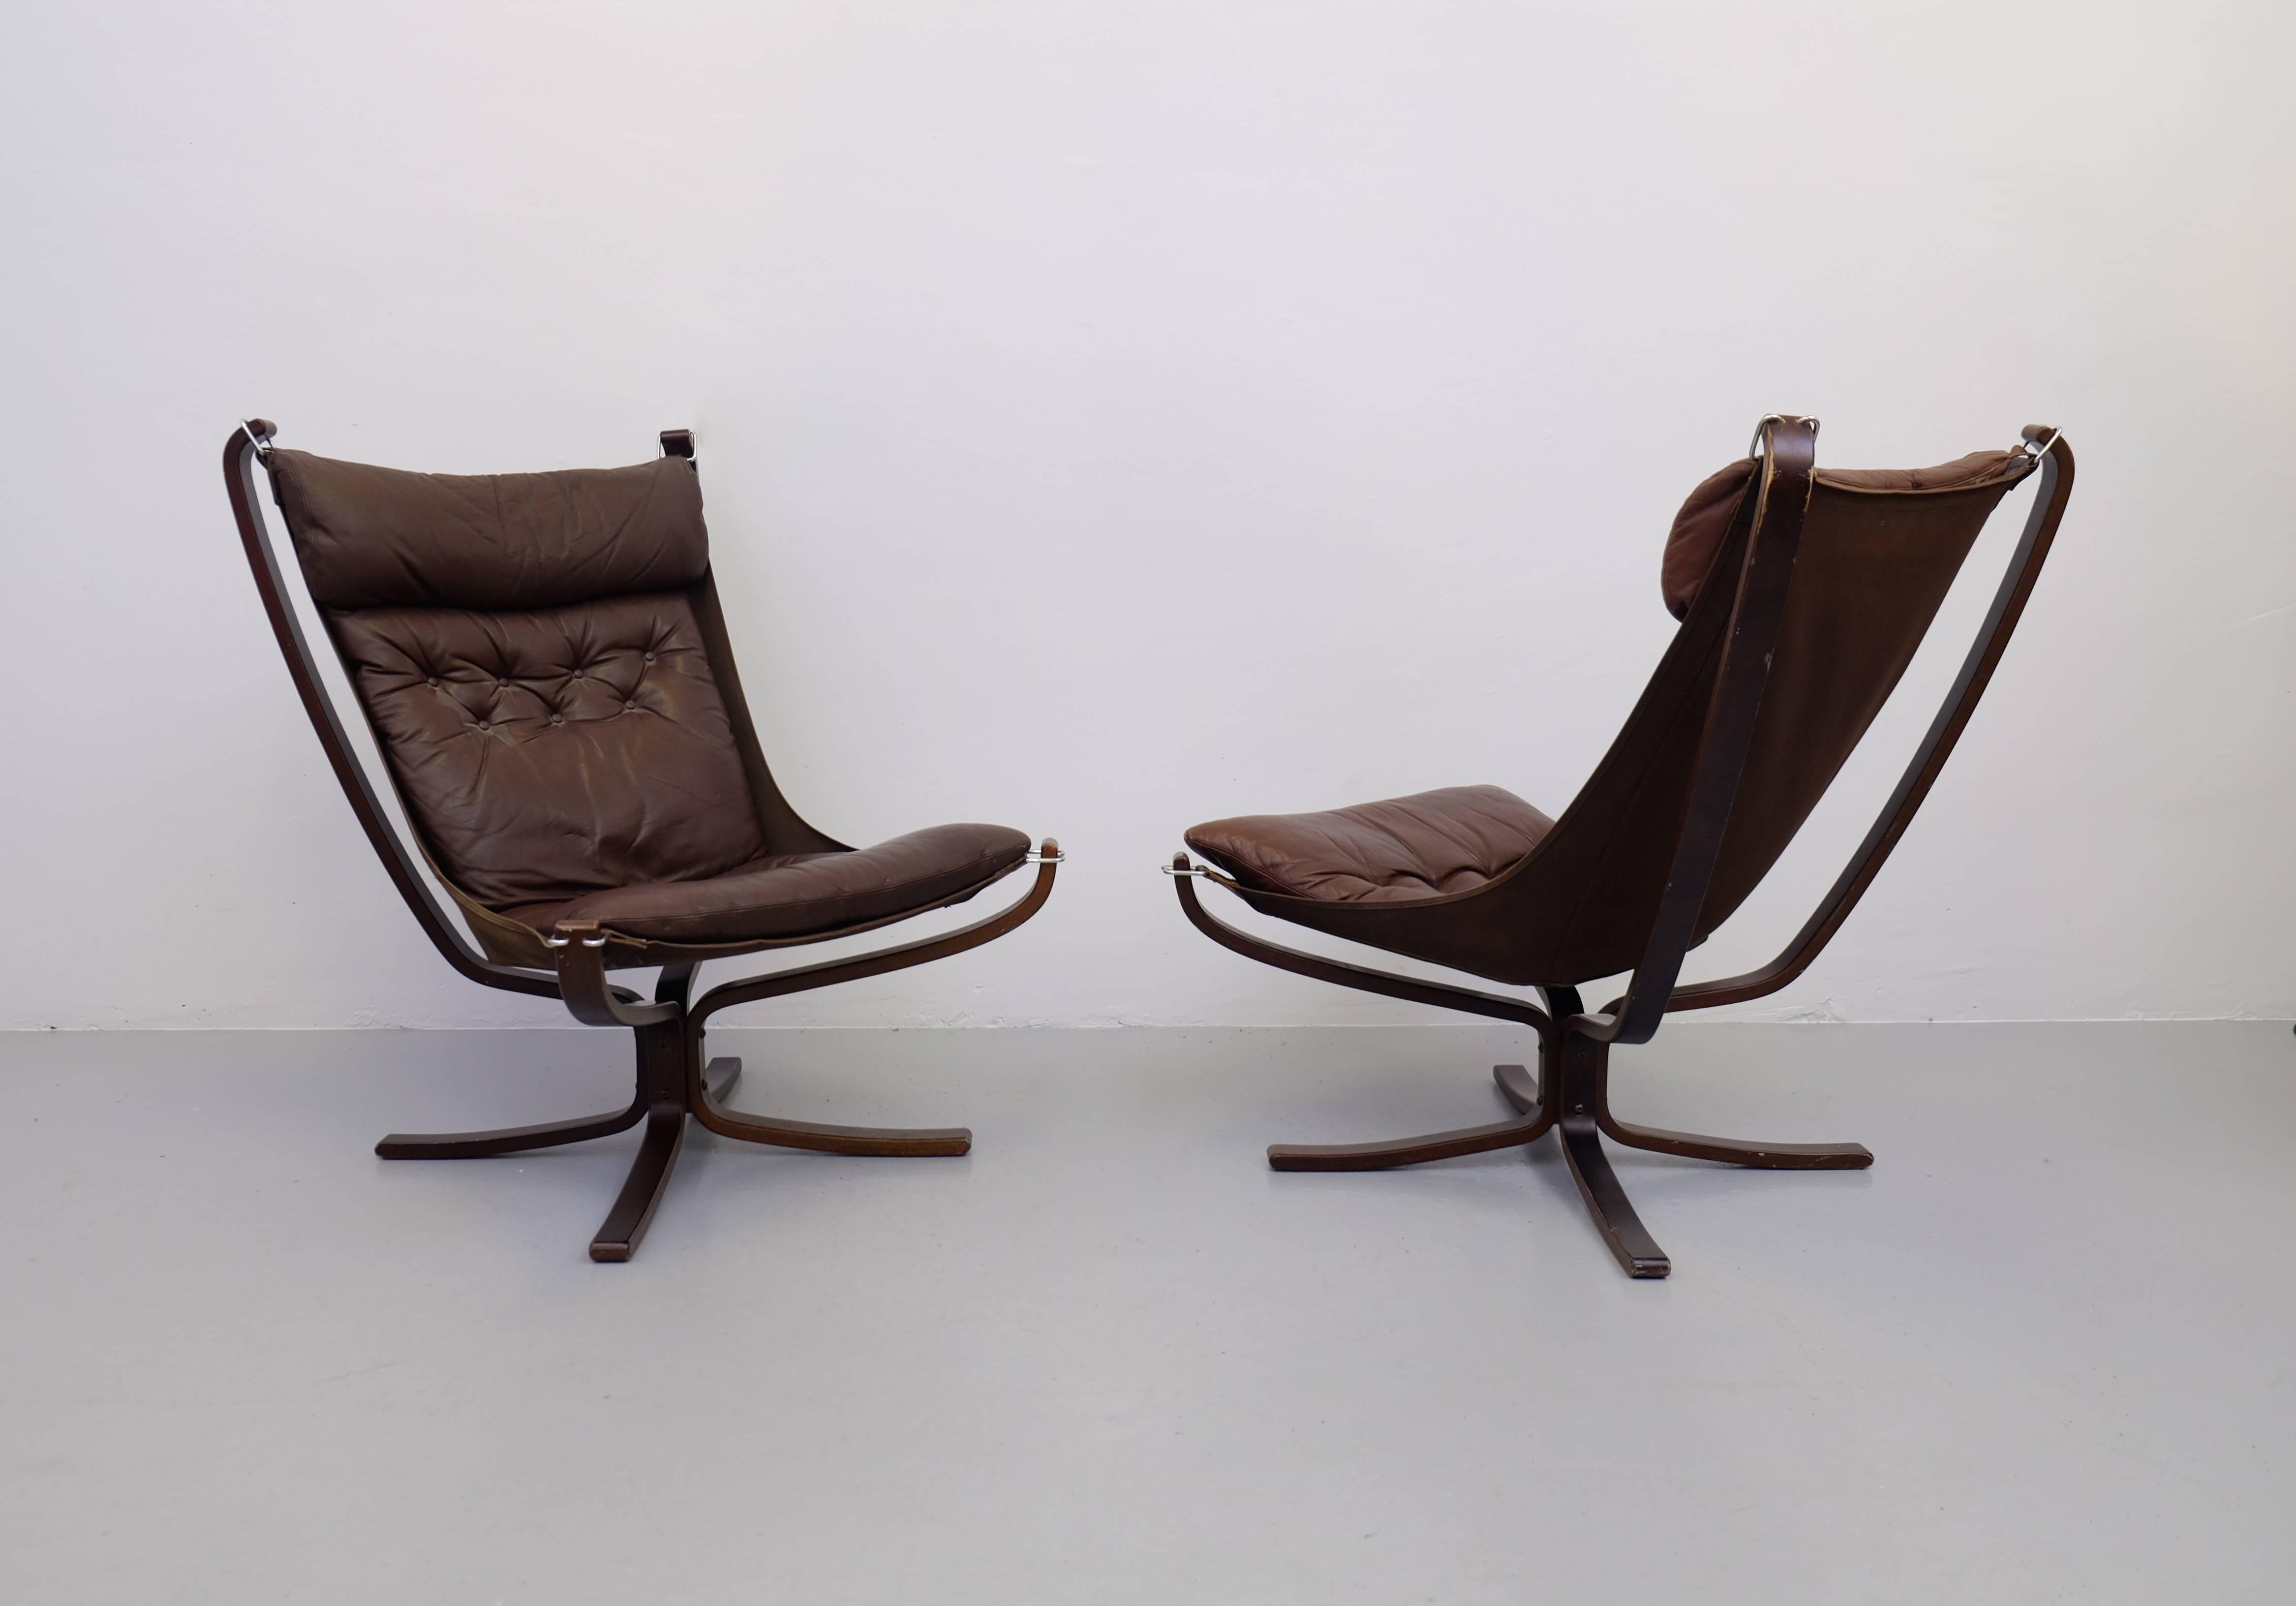 A super comfortable, amazing looking 1970s designed Sigurd Ressell iconic Falcon chairs. X-framed with hammock design with brown leather produced by Vatne Mobler, Norway.

